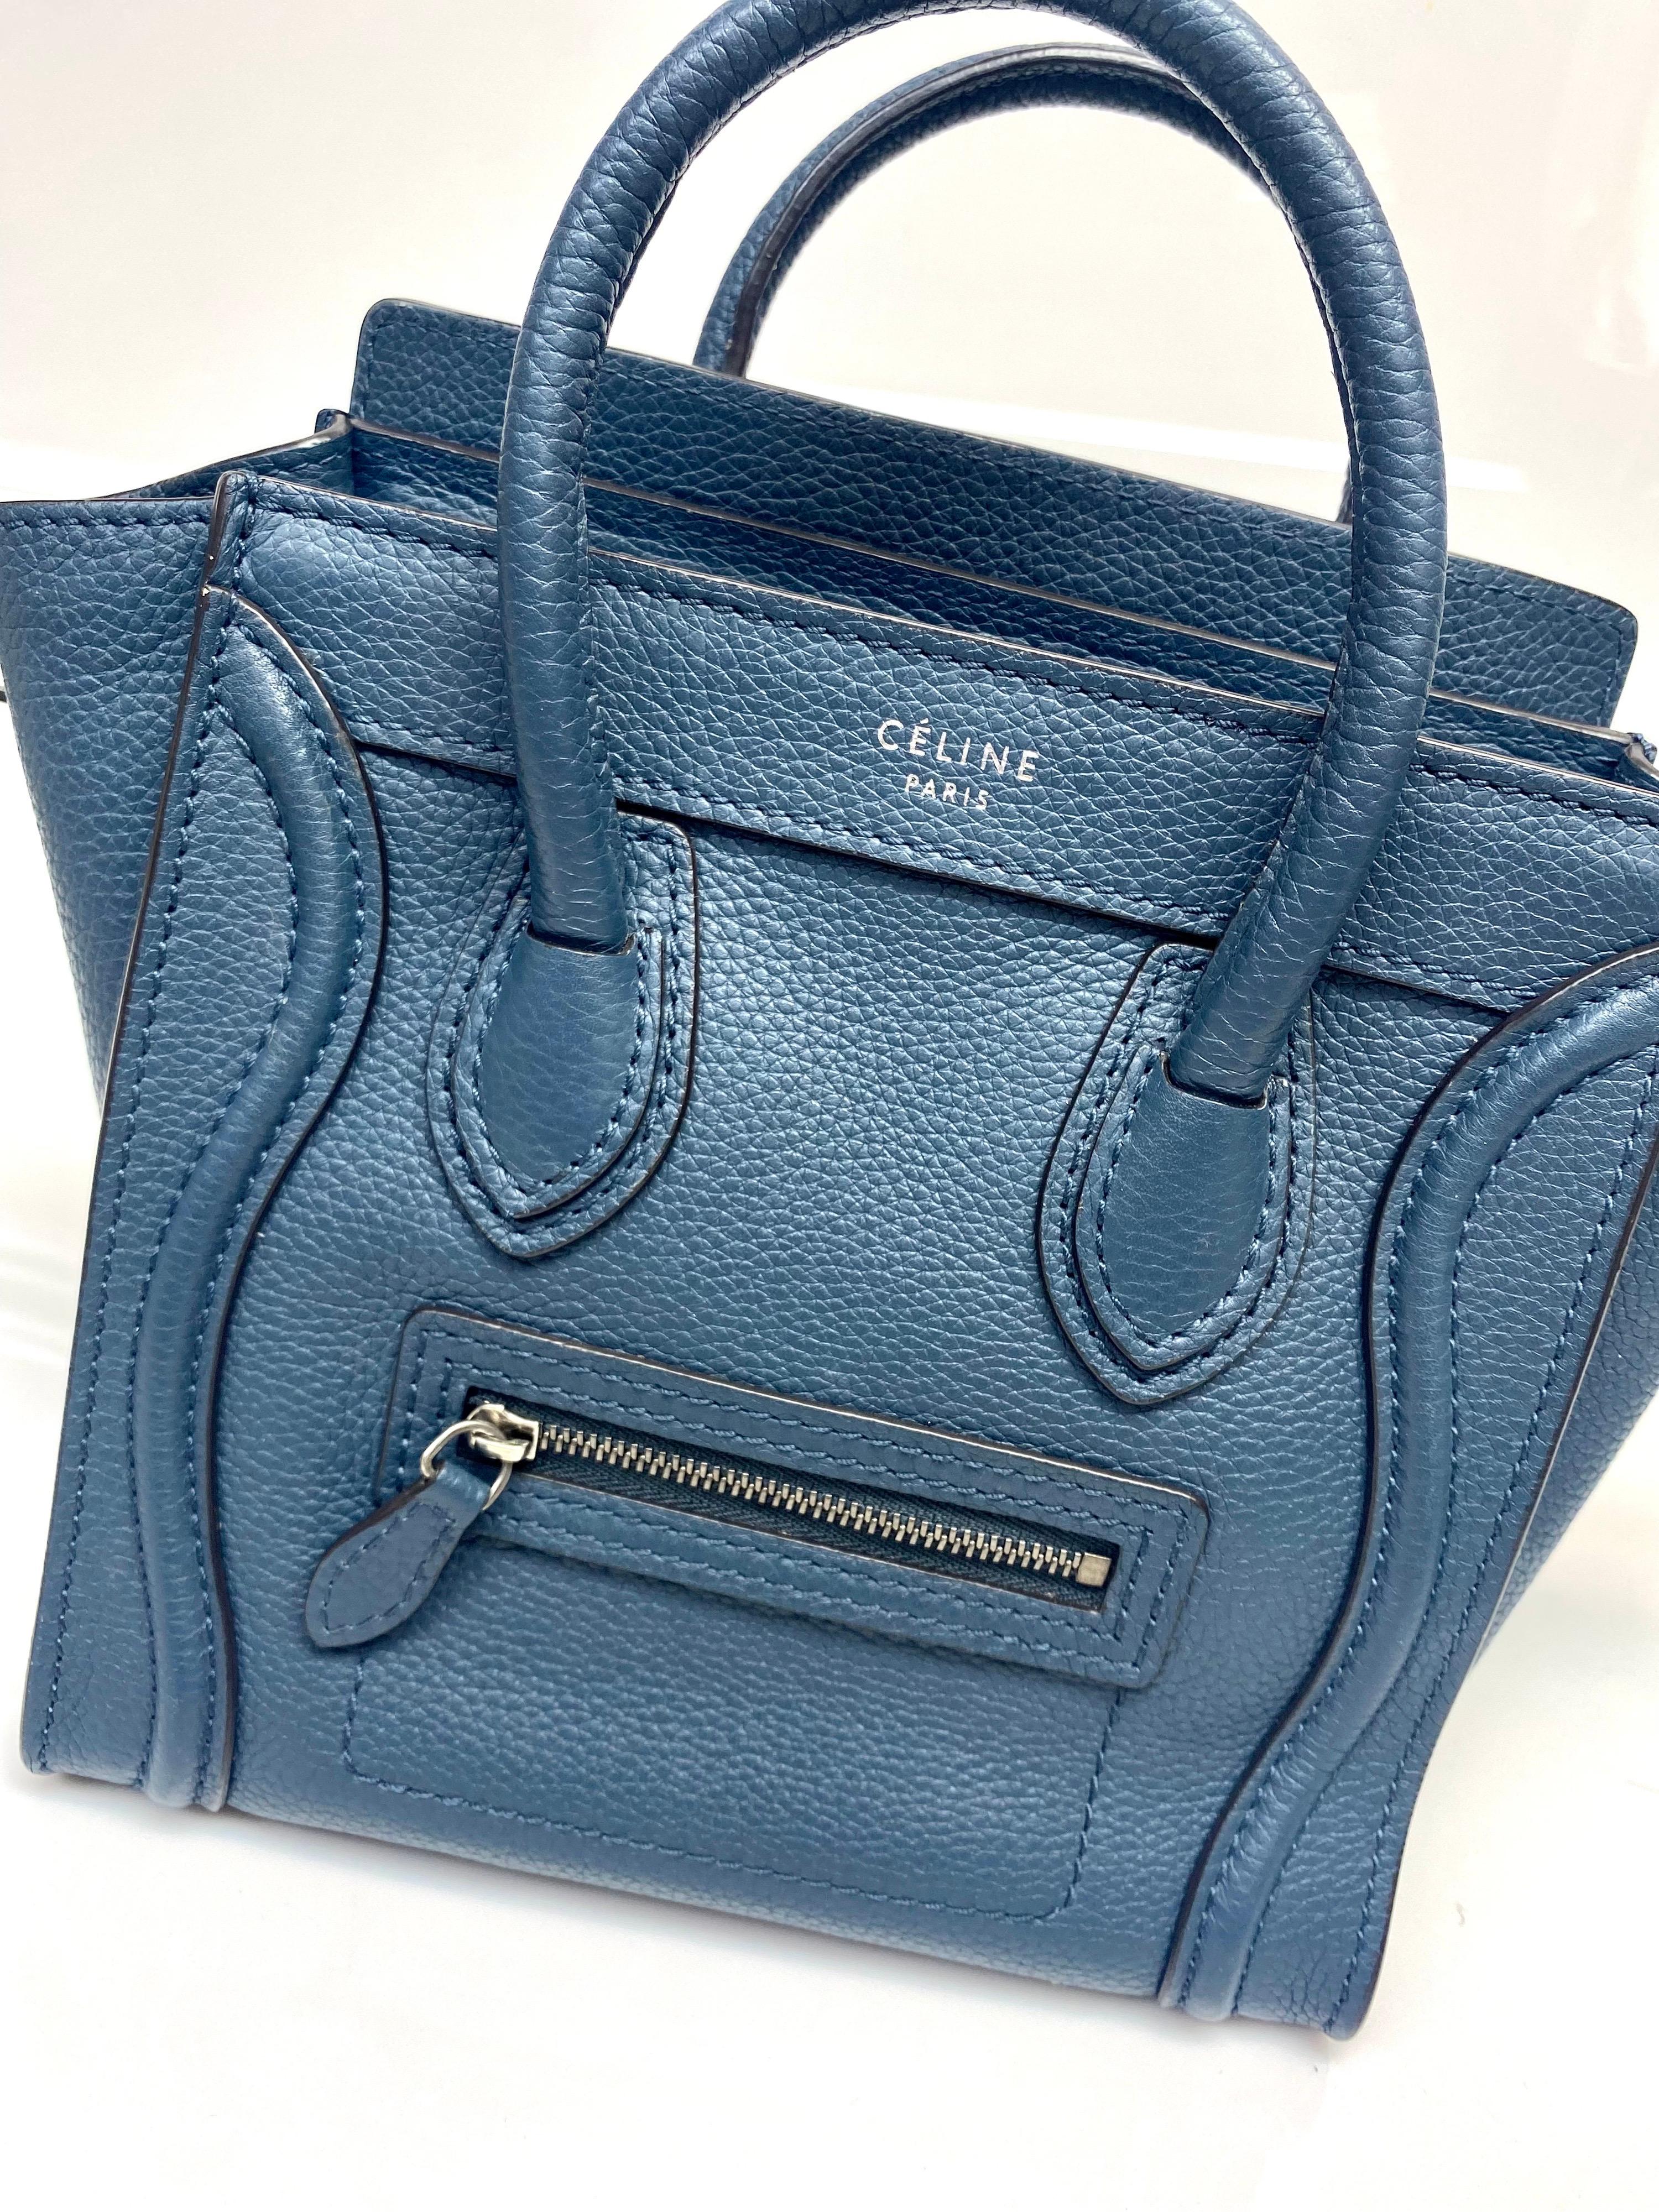 The Nano Luggage tote from Celine is one of the most popular handbags in the world because of its style and practicality. This tote is crafted from leather and designed in a blue shade. It comes with rolled top handles and a front zip pocket. The